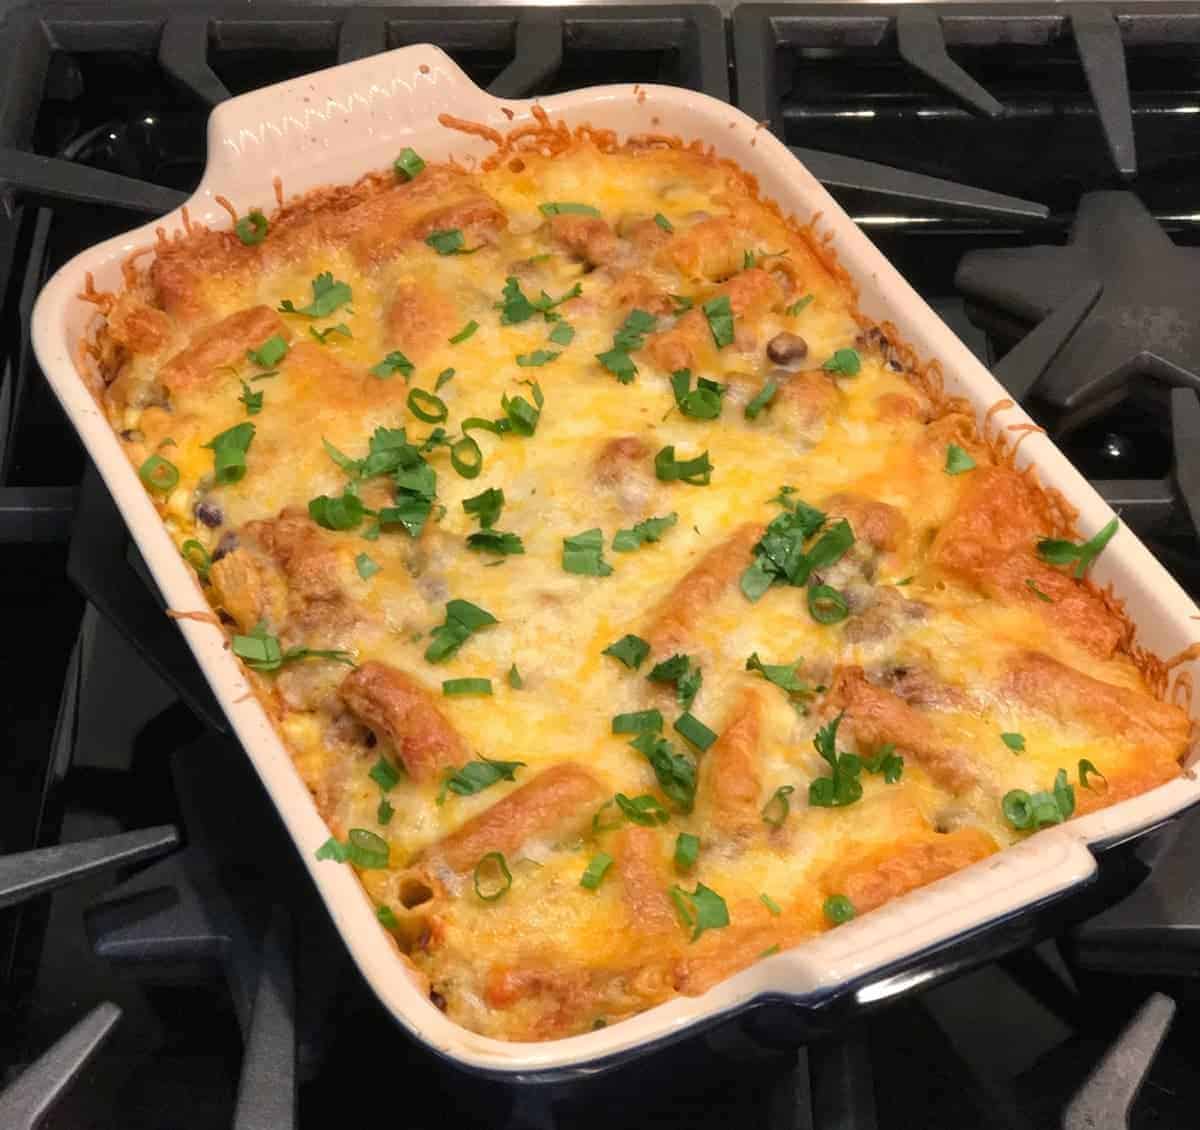 One pan enchilada pasta recipe covered with cheese and topped with green onions and cilantro. recipe by foodology geek